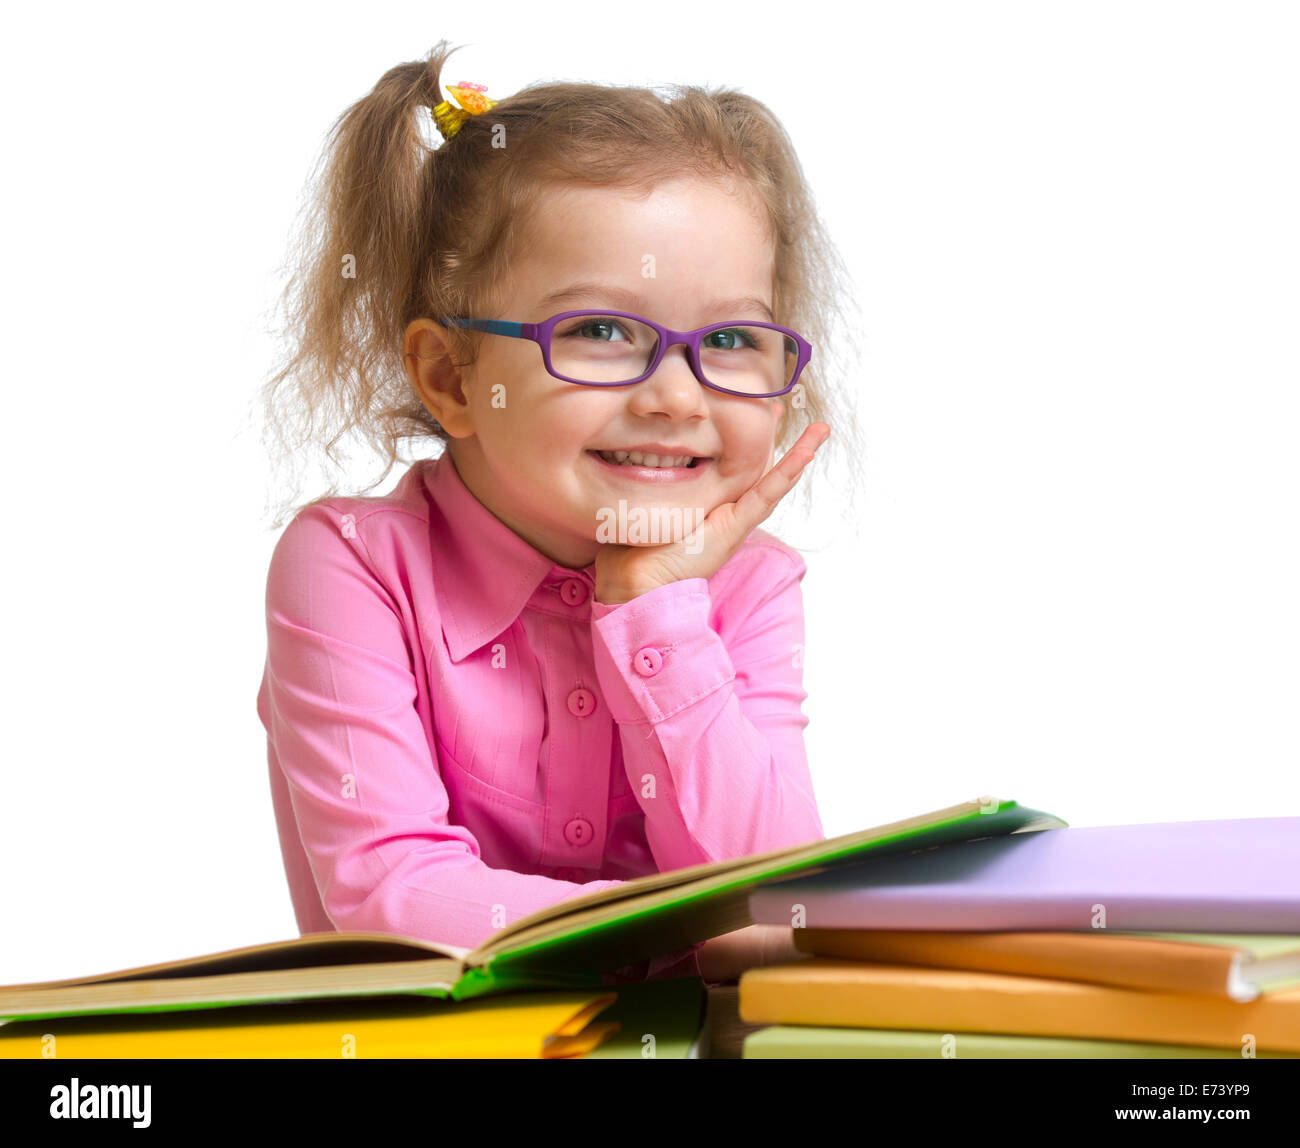 Happy smiling kid girl in glasses reading books sitting at table Stock Photo